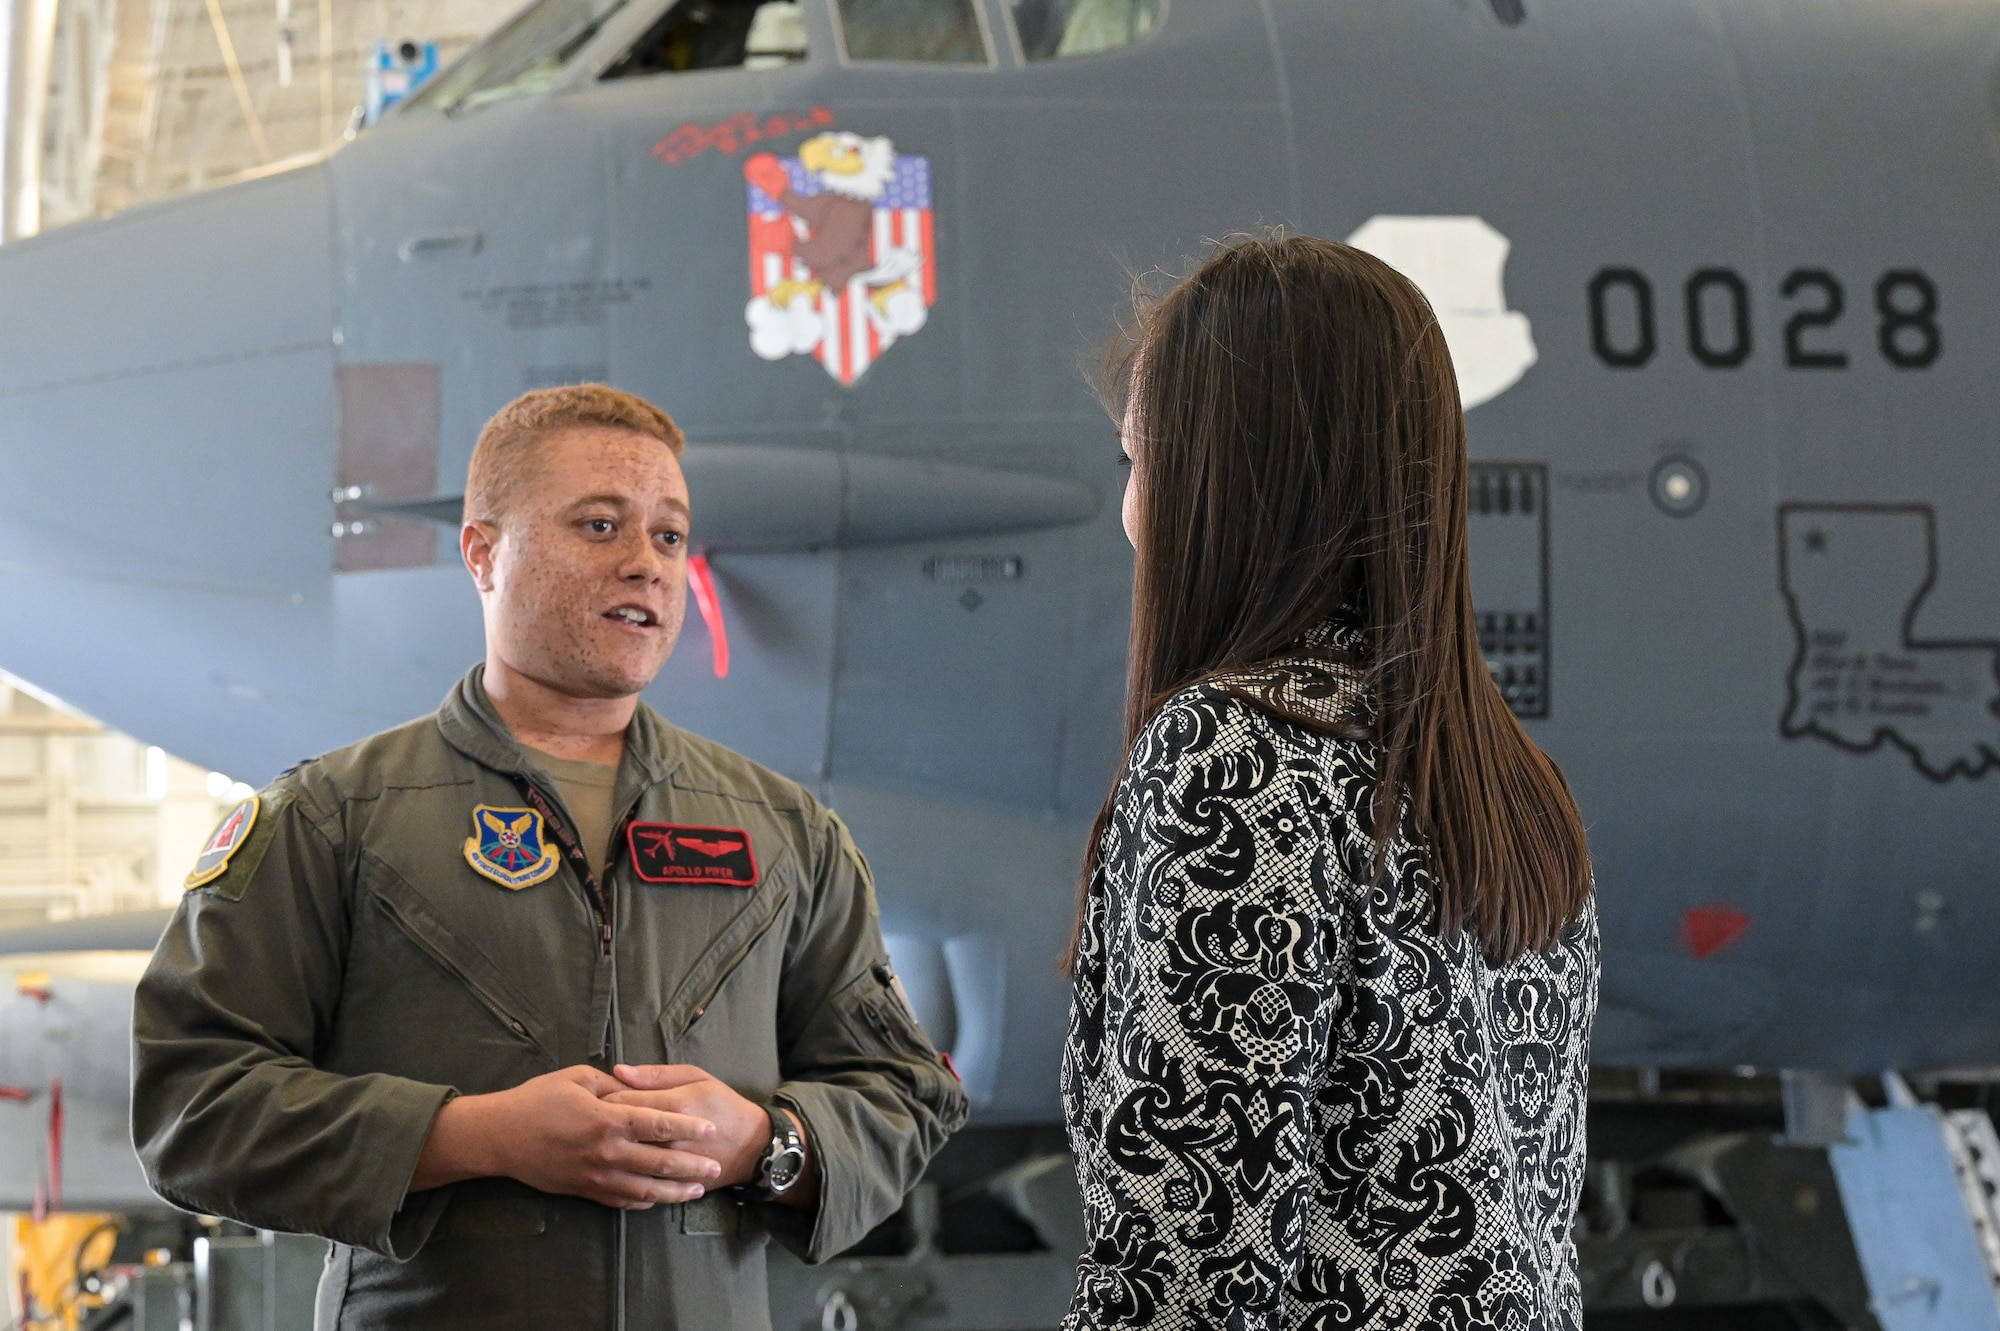 The Honorable Gina Ortiz Jones, Under Secretary of the Air Force, receives a brief by Capt. Kason Pifer, 96th Bomb Squadron B-52H Stratofortress pilot, about the B-52H Stratofortress NC3 capabilities during a visit to Barksdale Air Force Base, Louisiana, April 12, 2022. The NC3 is made of a multitude of ground, air and space components such as receivers and terminals.  (U.S. Air Force photo by Senior Airman Jonathan E. Ramos)